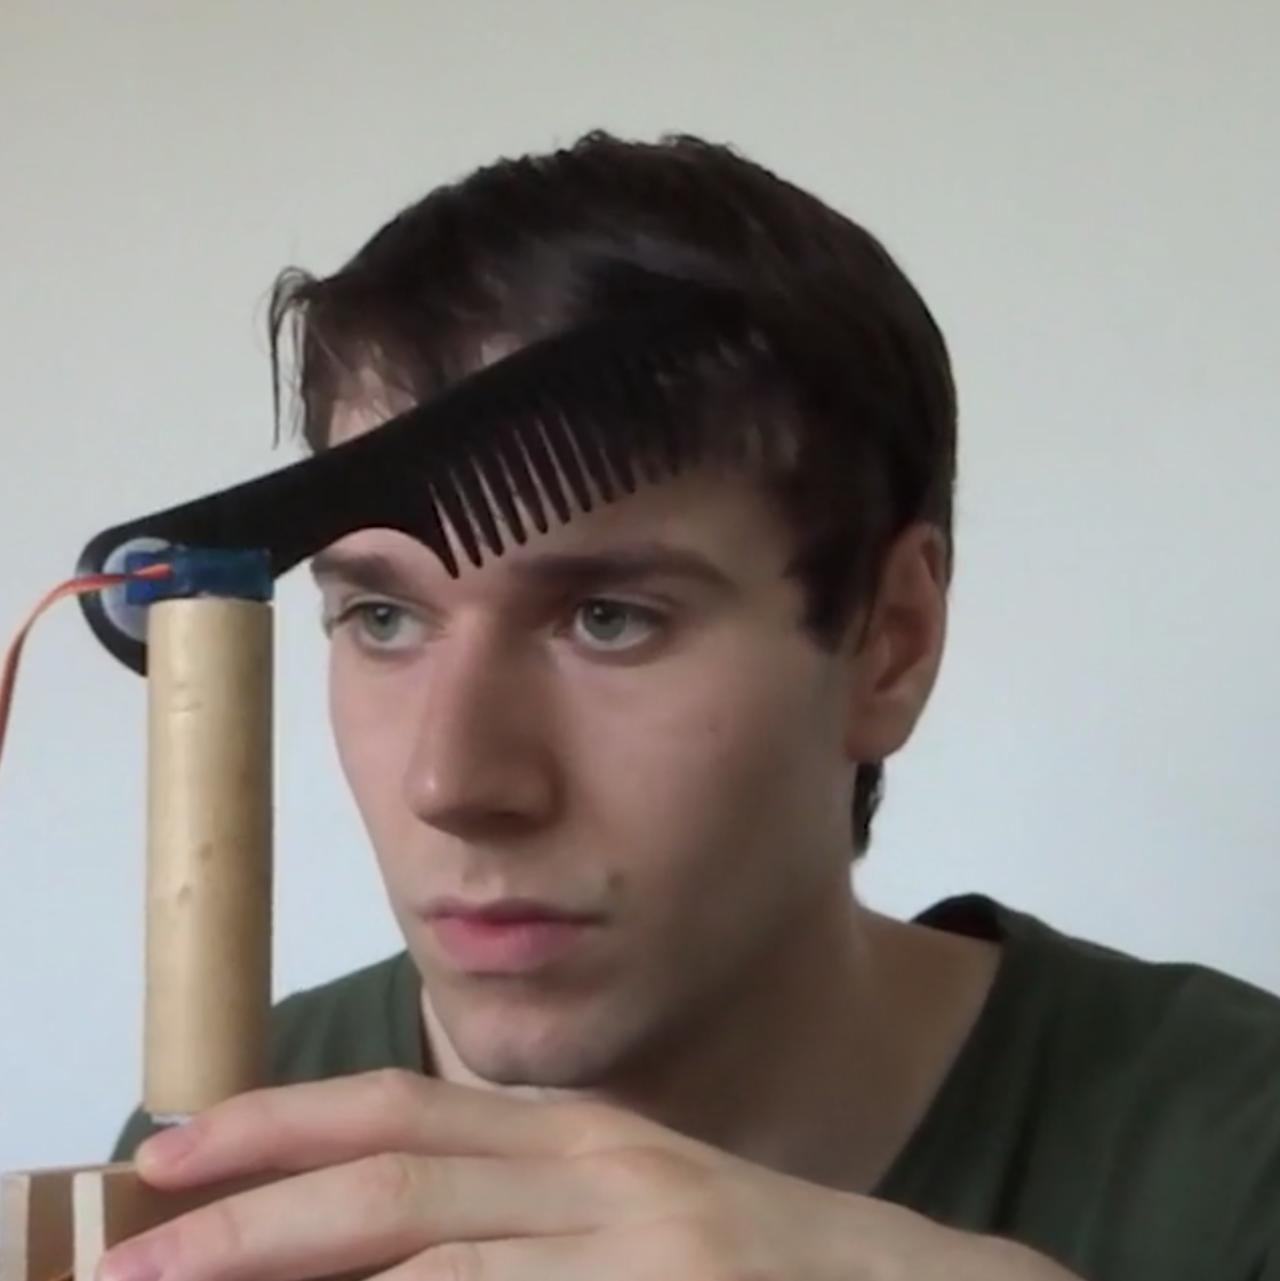 This robot can comb your hair